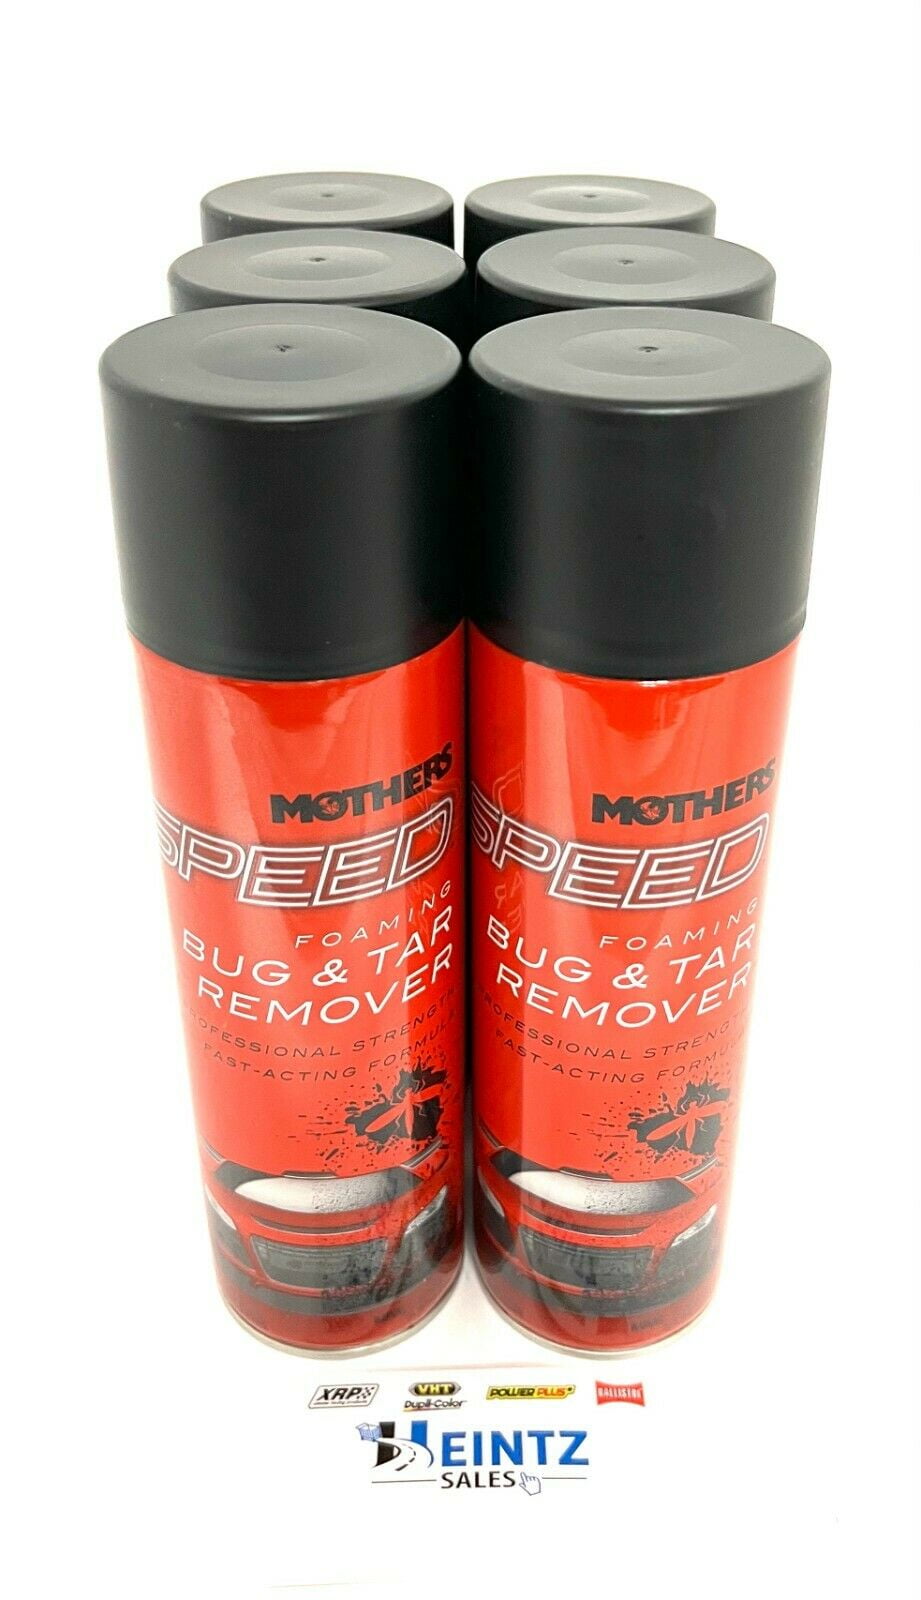 Mothers 18.5 oz. Speed Foaming Bug and Tar Remover Aerosol Spray (2-Pack)